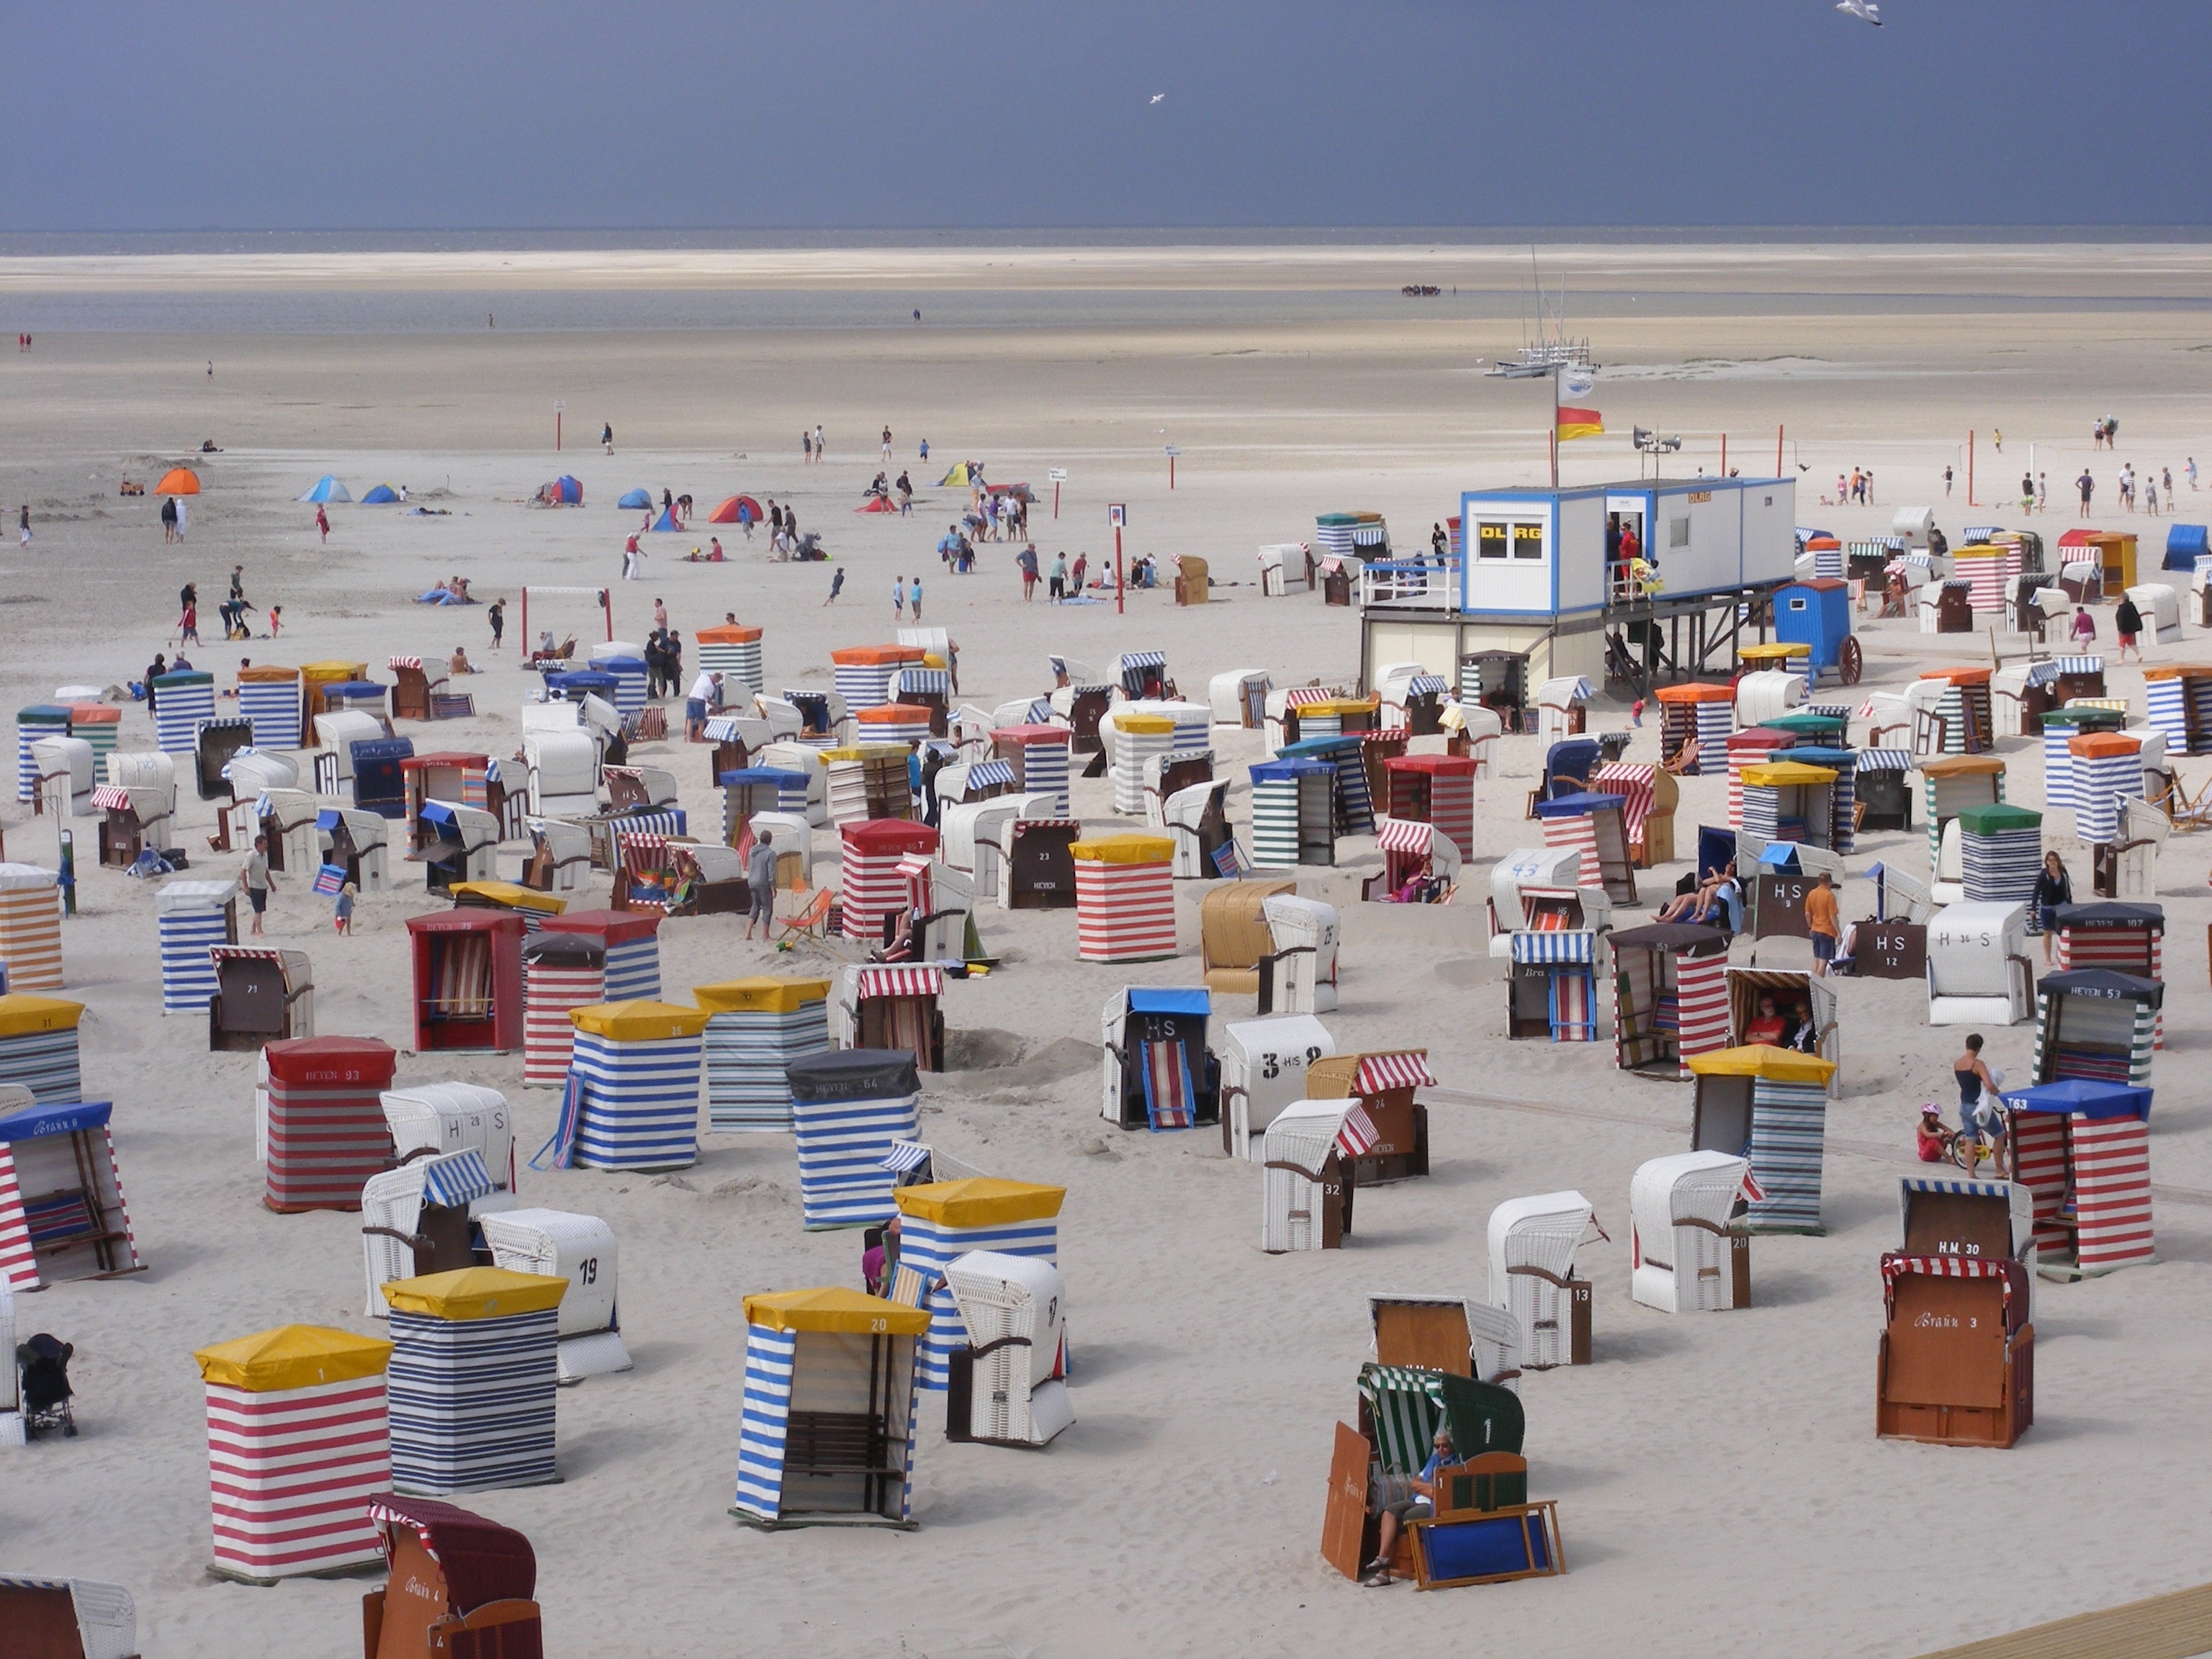 Summer, Holiday, Borkum, Clubs, Beach, large group of objects, outdoors